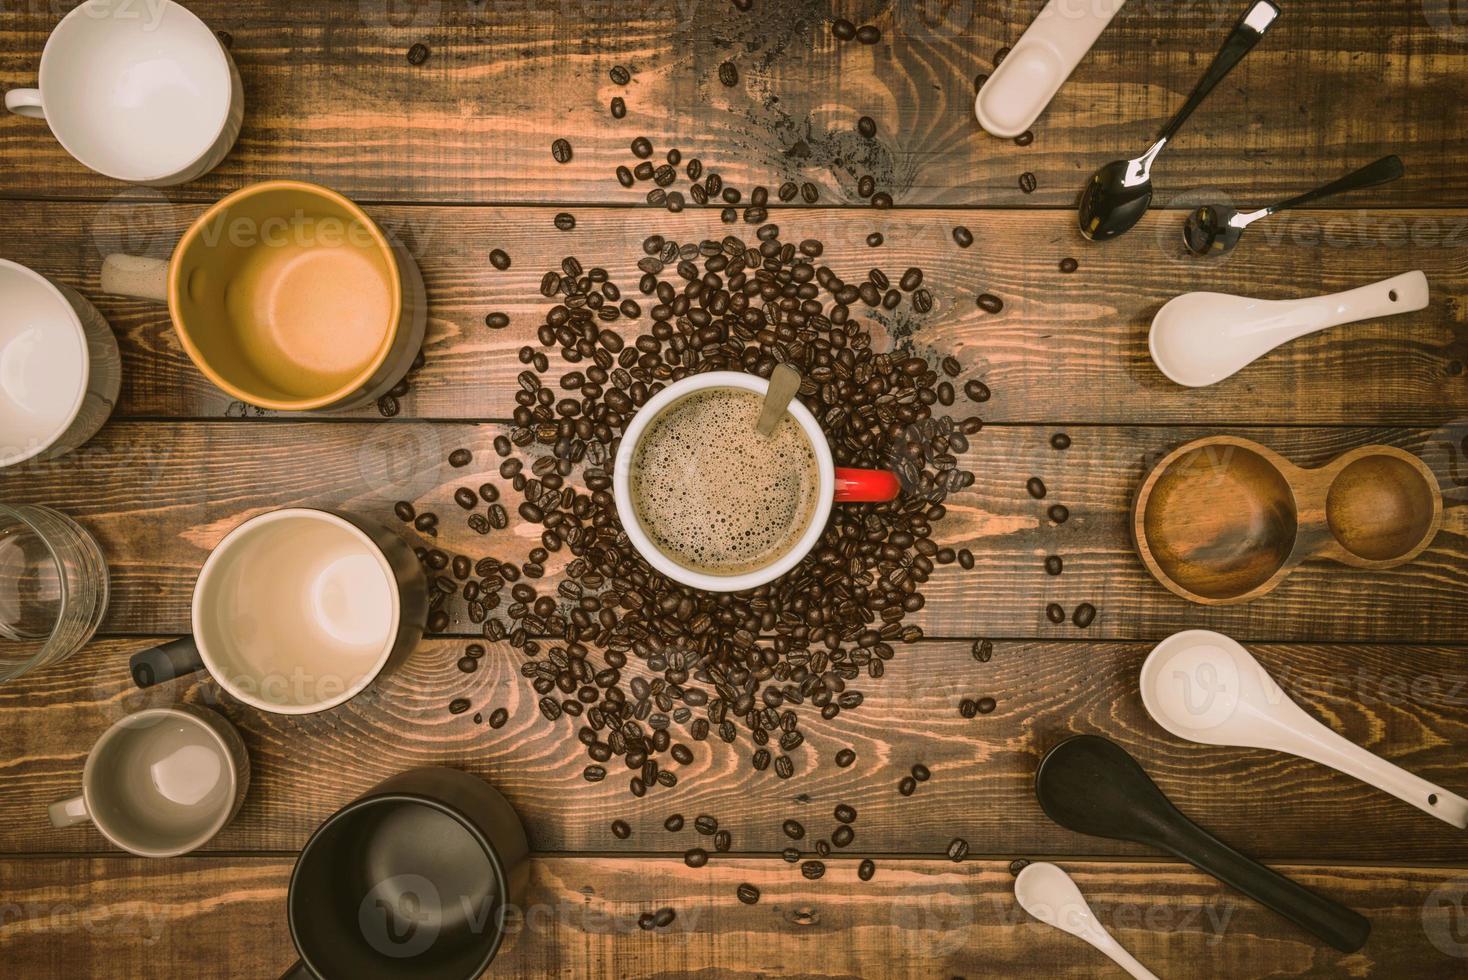 Many cups of coffee with beans on wooden table, top view. Flat lay composition with cups of coffee on background Old wood grain. Food photography, beverage. photo